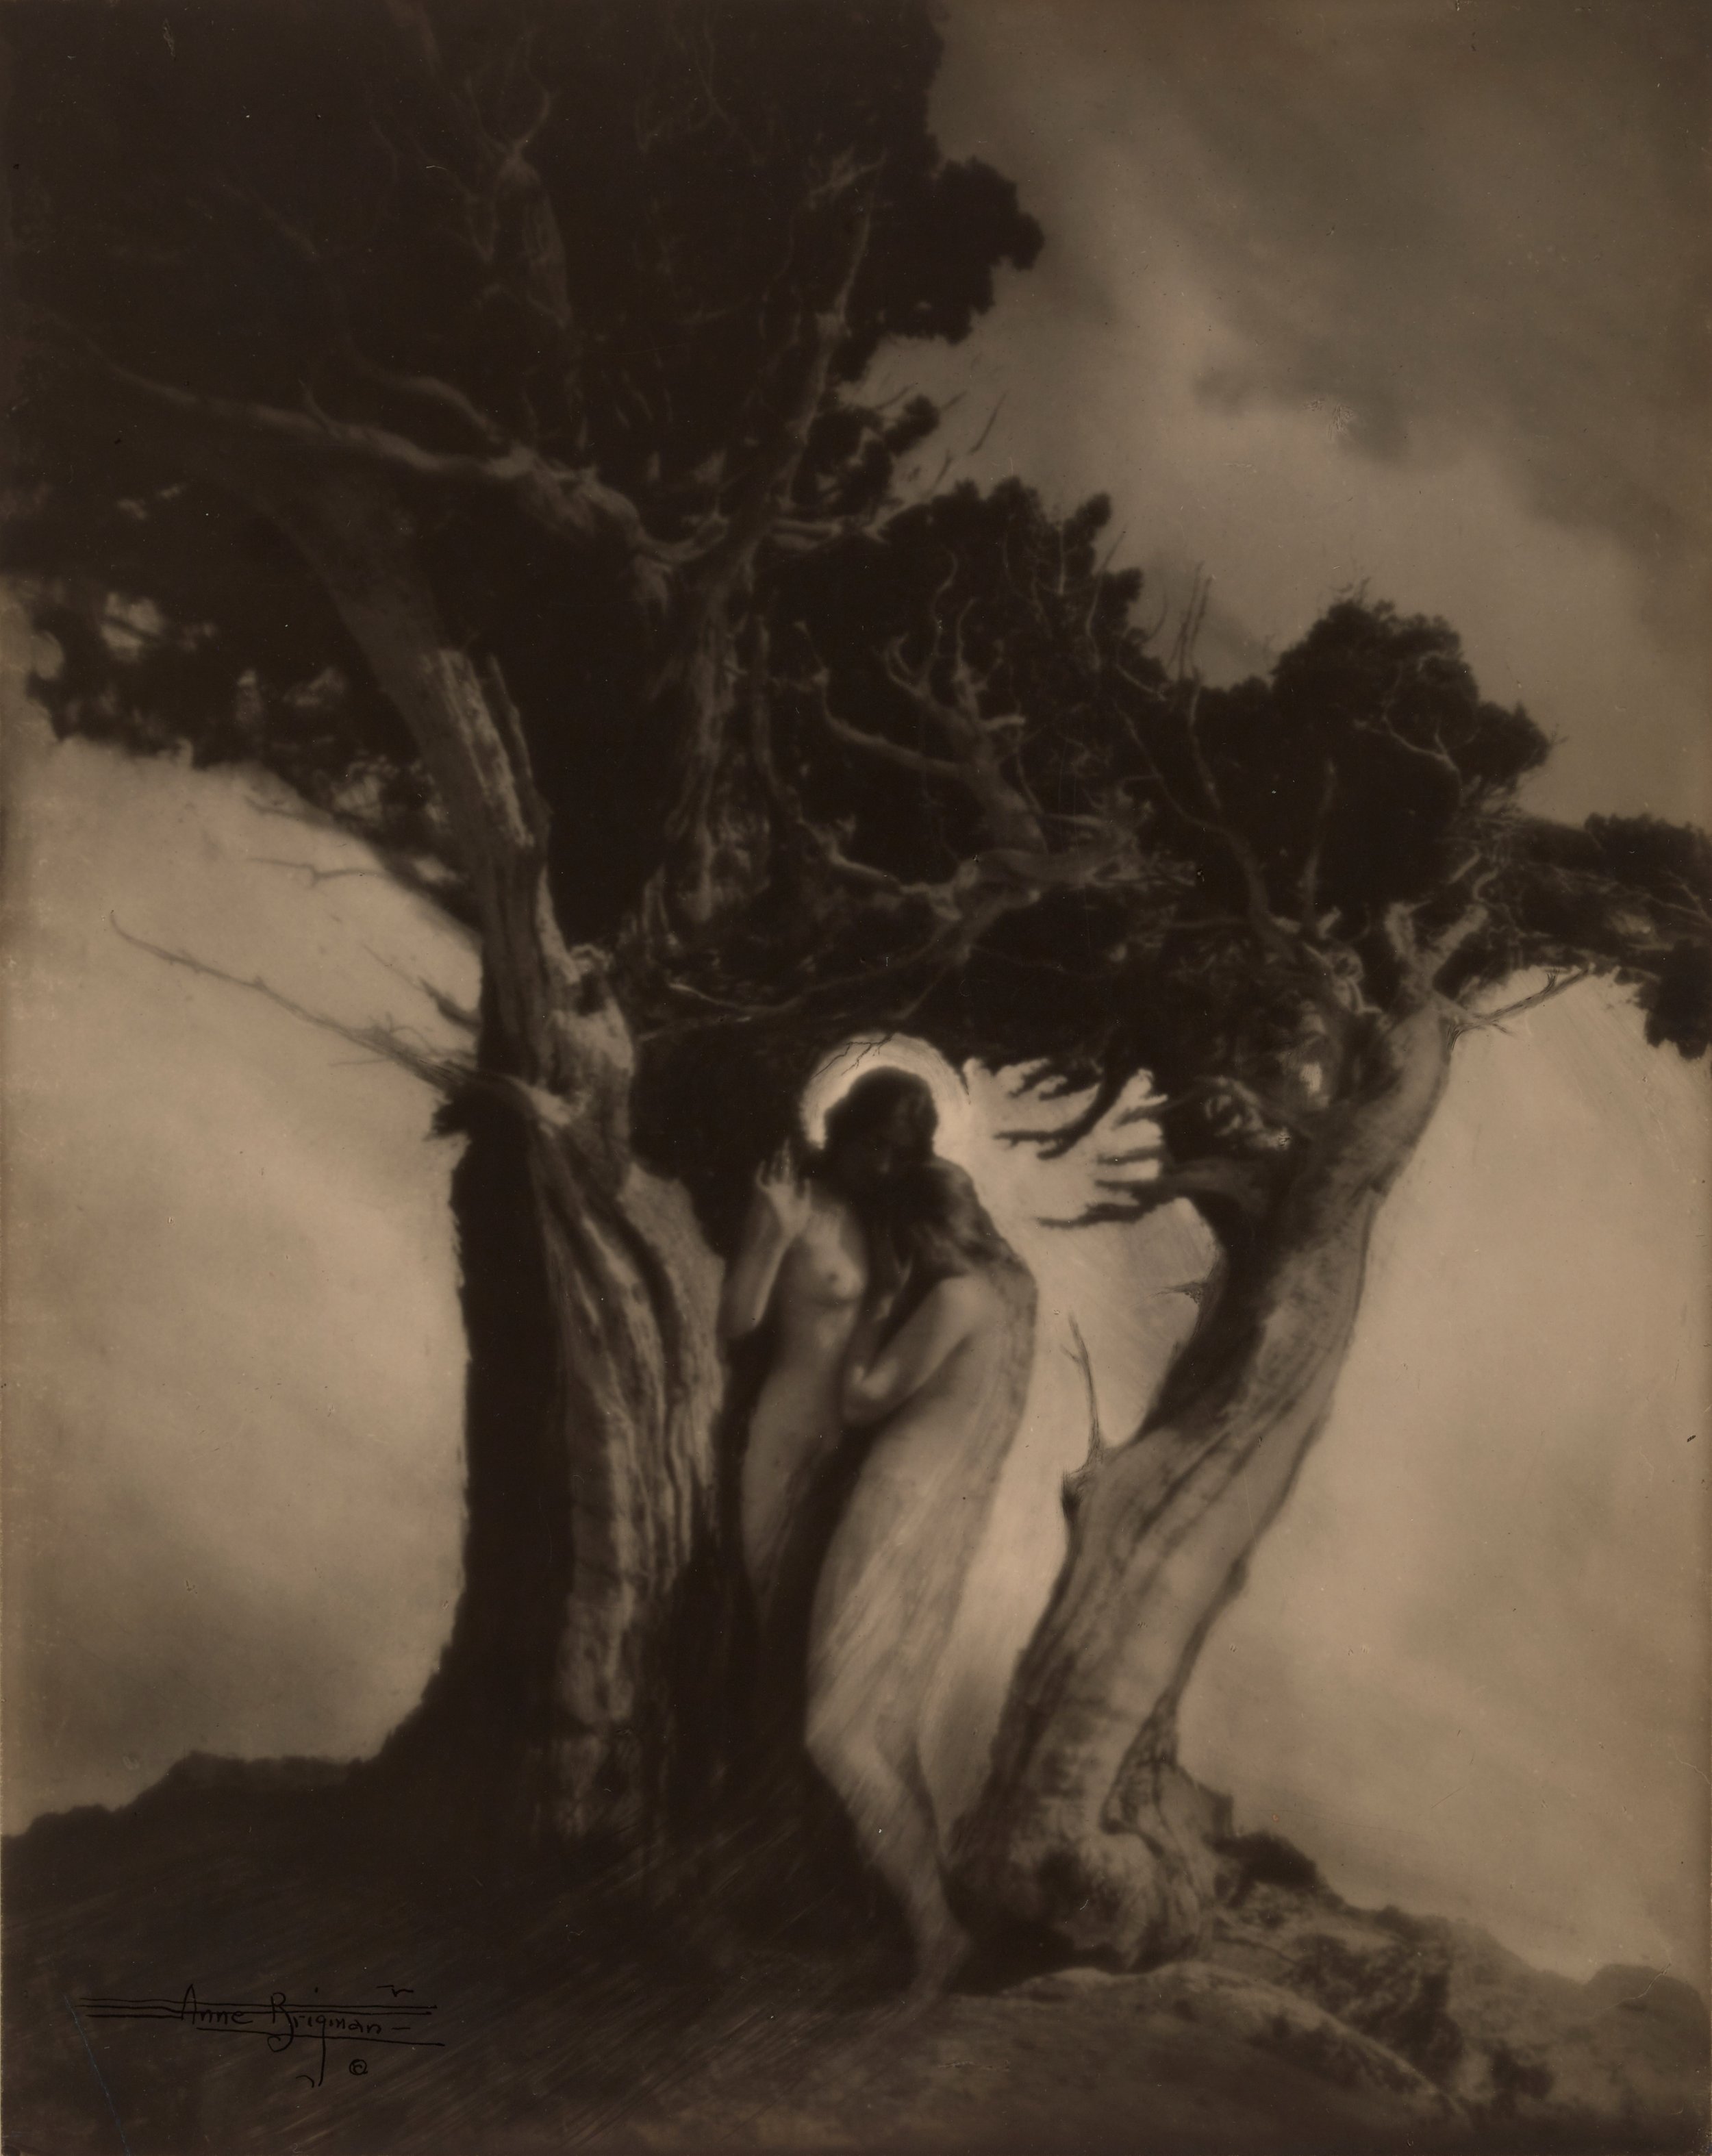   Anne Brigman  United States, 1869–1950  Heart of the Storm , 1912 gelatin silver print, 9 3/4 x 7 3/4 inches Promised Gift from the Judy Glickman Lauder Collection, 5.2016.1 